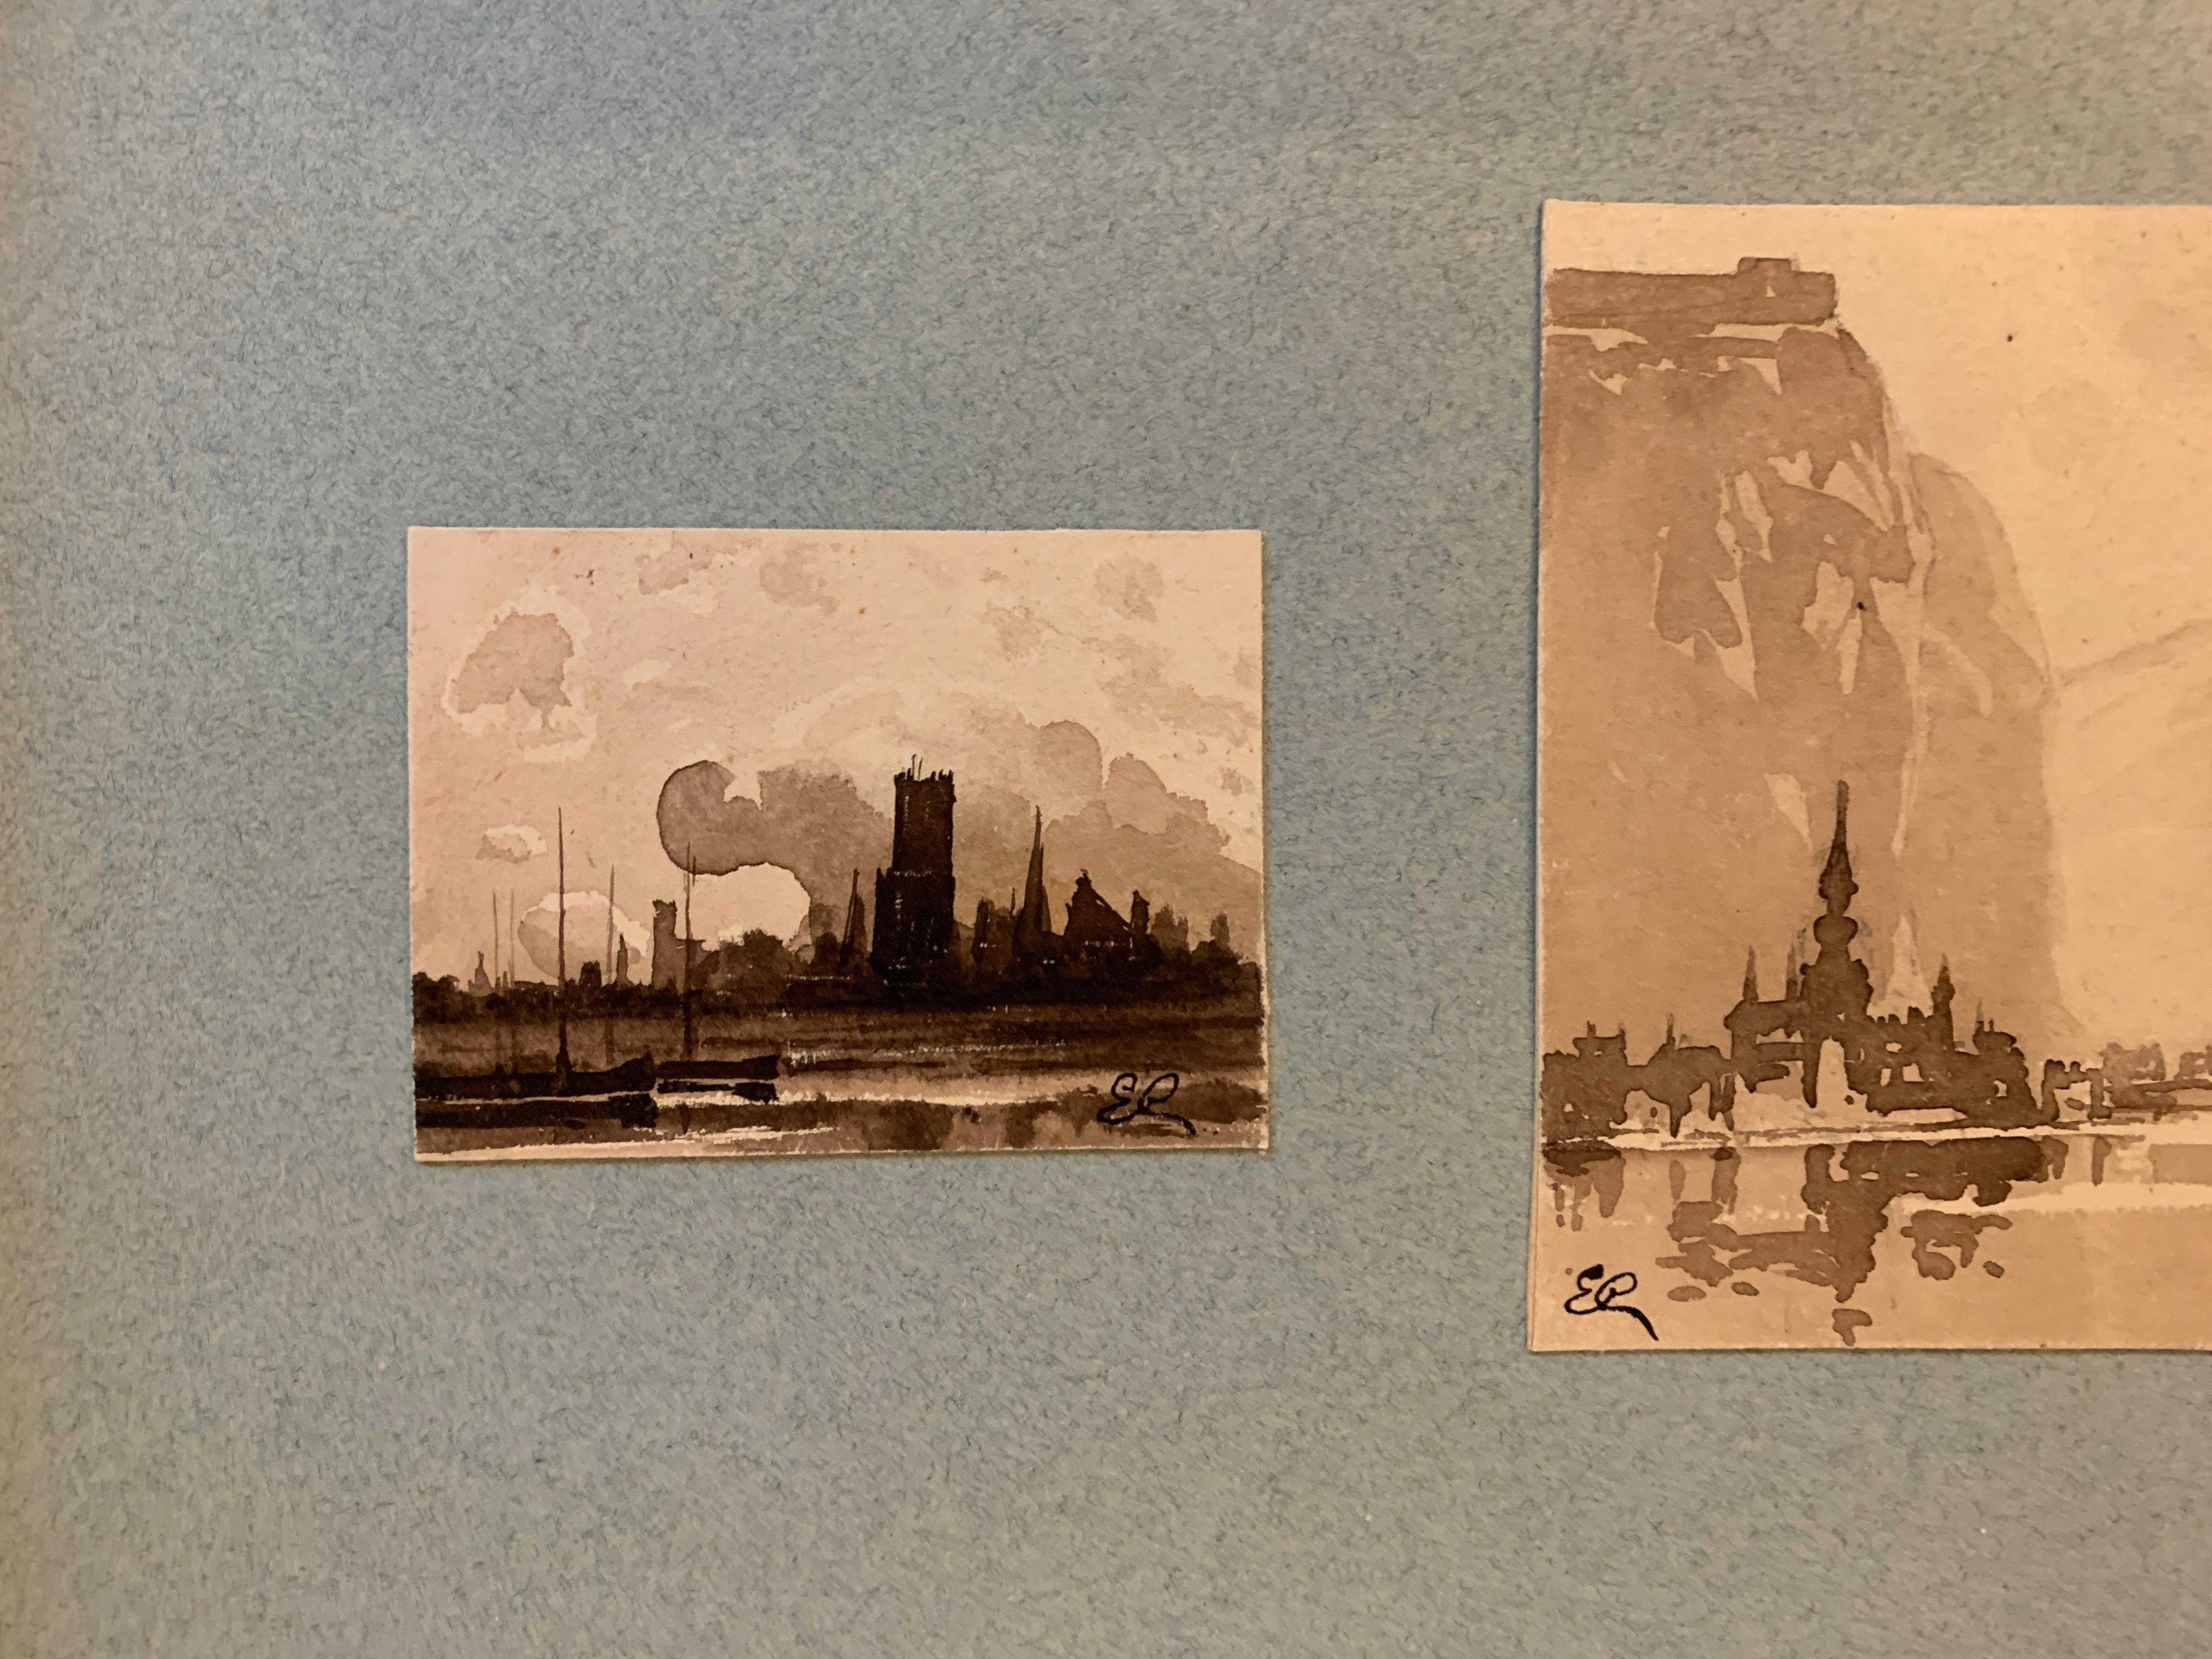 3 French 19th century Pen and Ink landscapes from a sketch folder - Art by Emile Cagniart